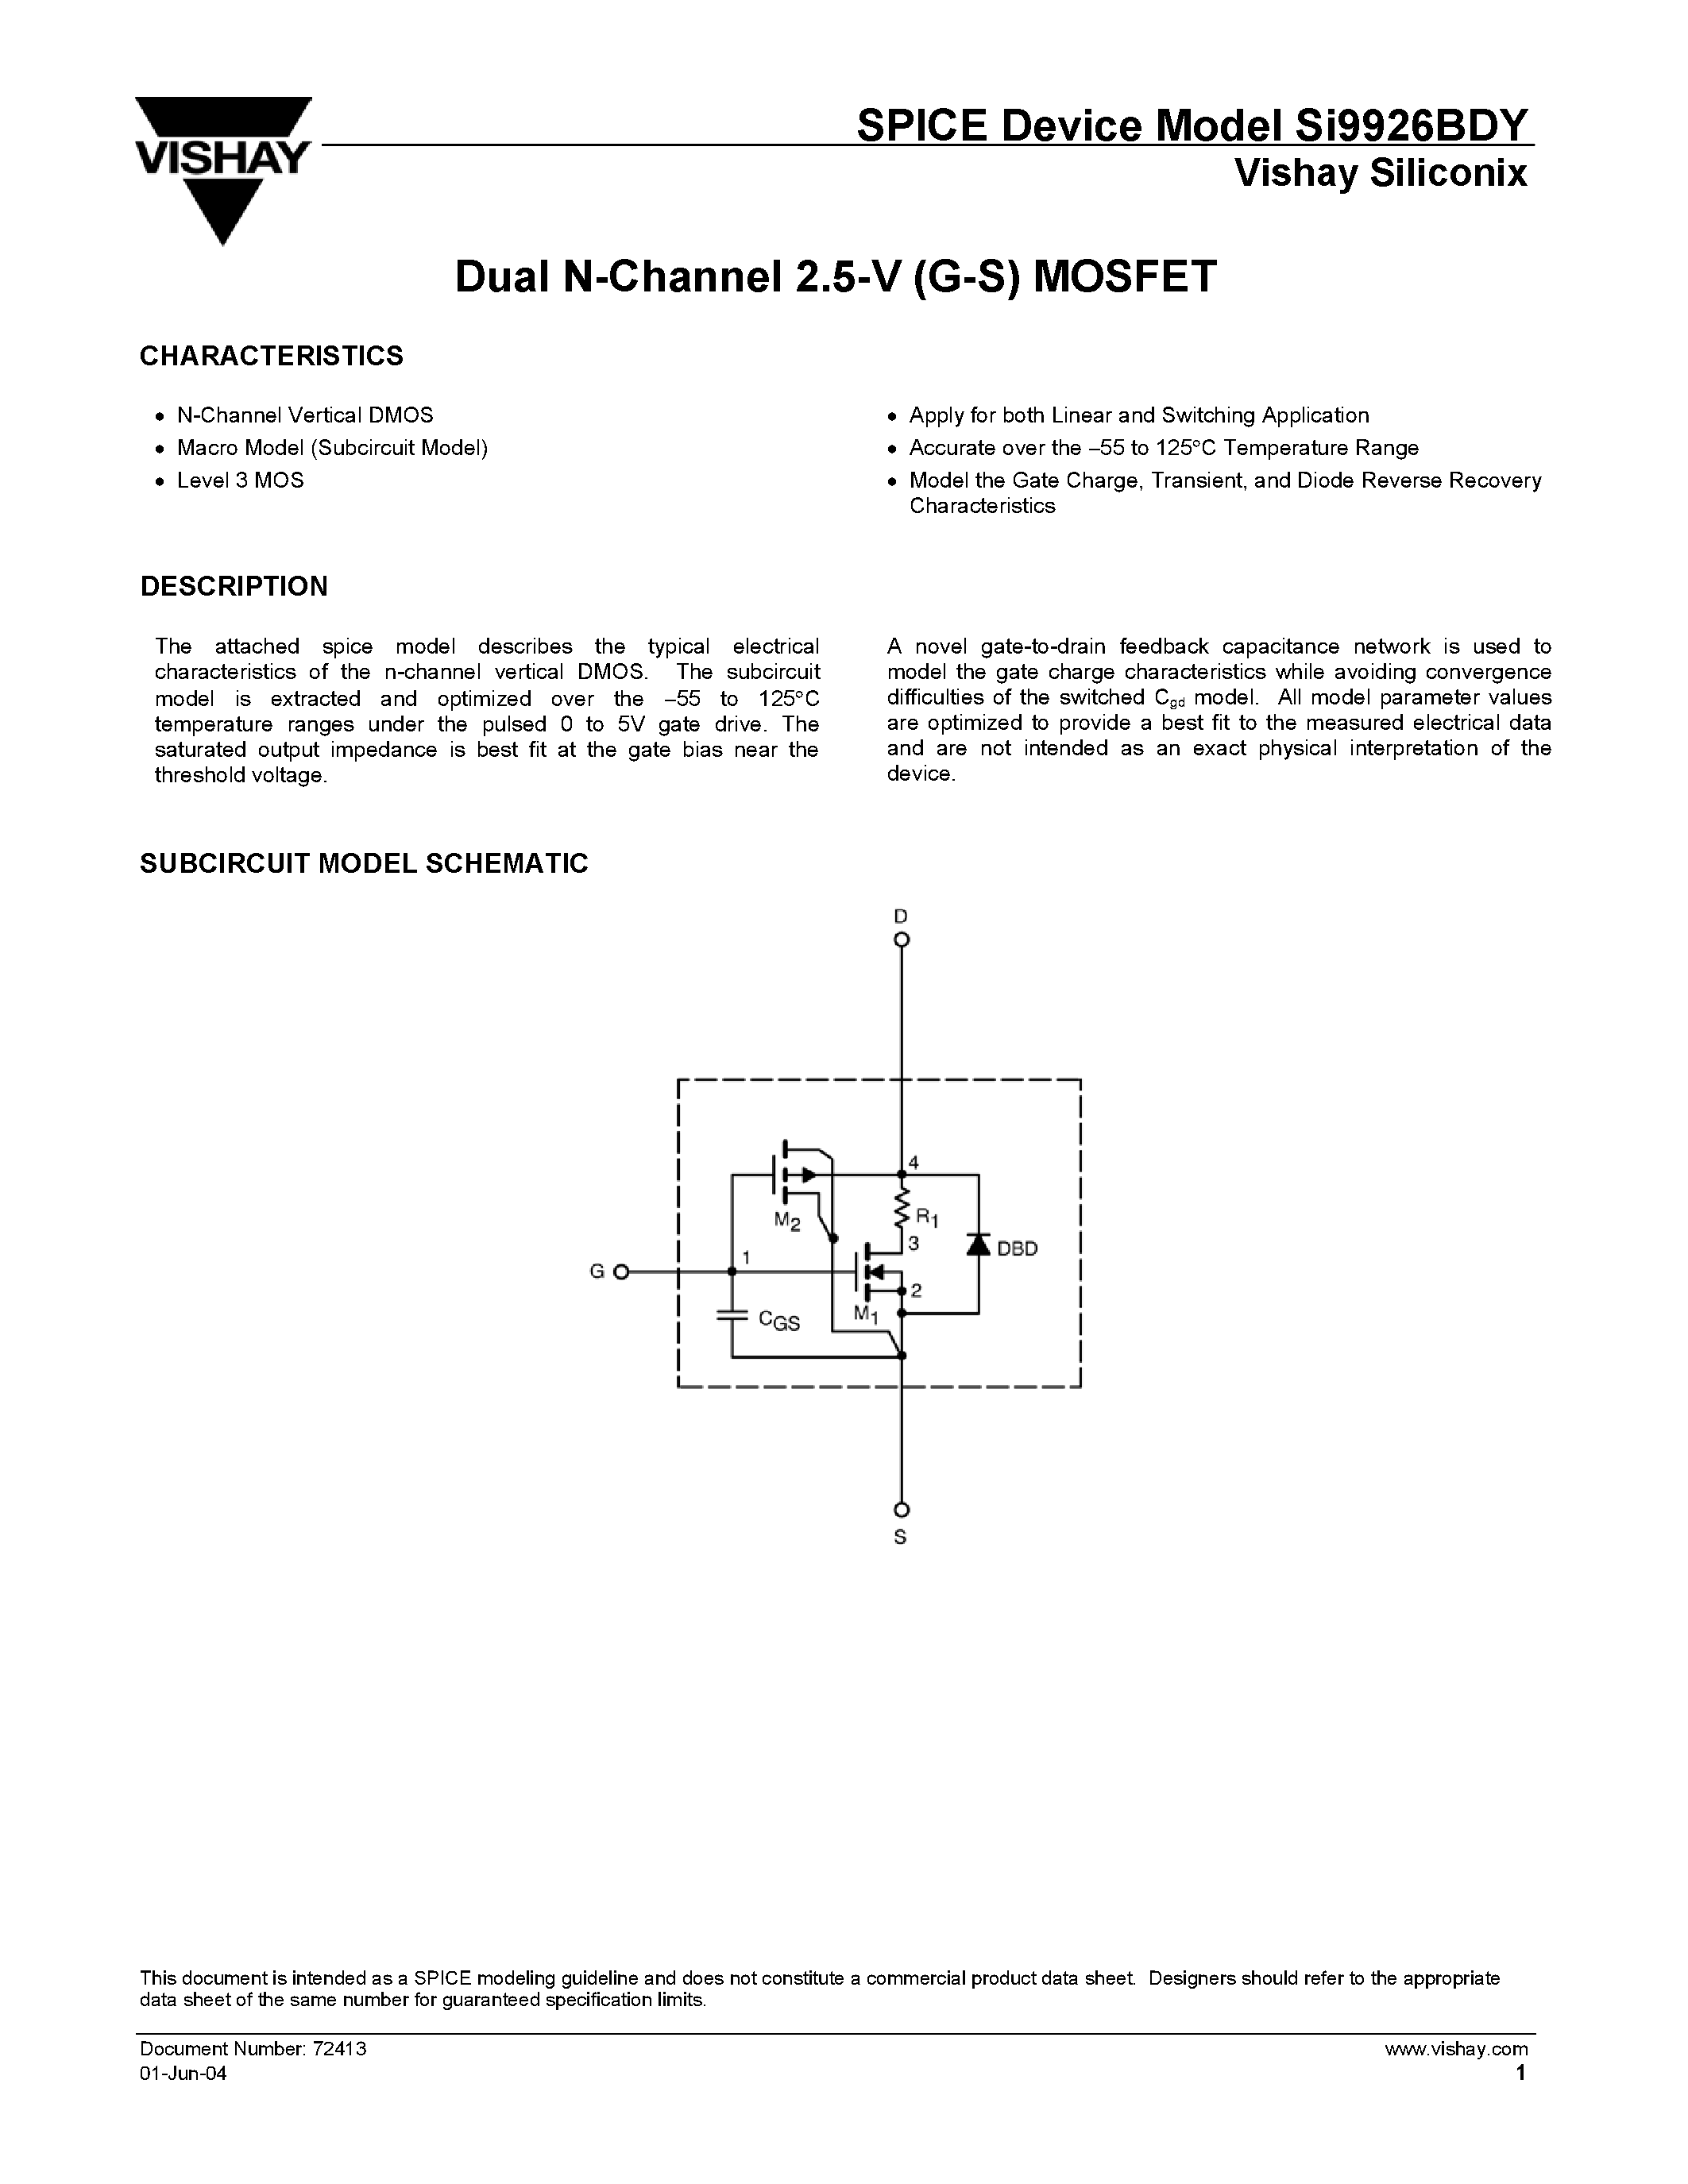 Datasheet SI9926BDY - Dual N-Channel 2.5-V (G-S) MOSFET page 1